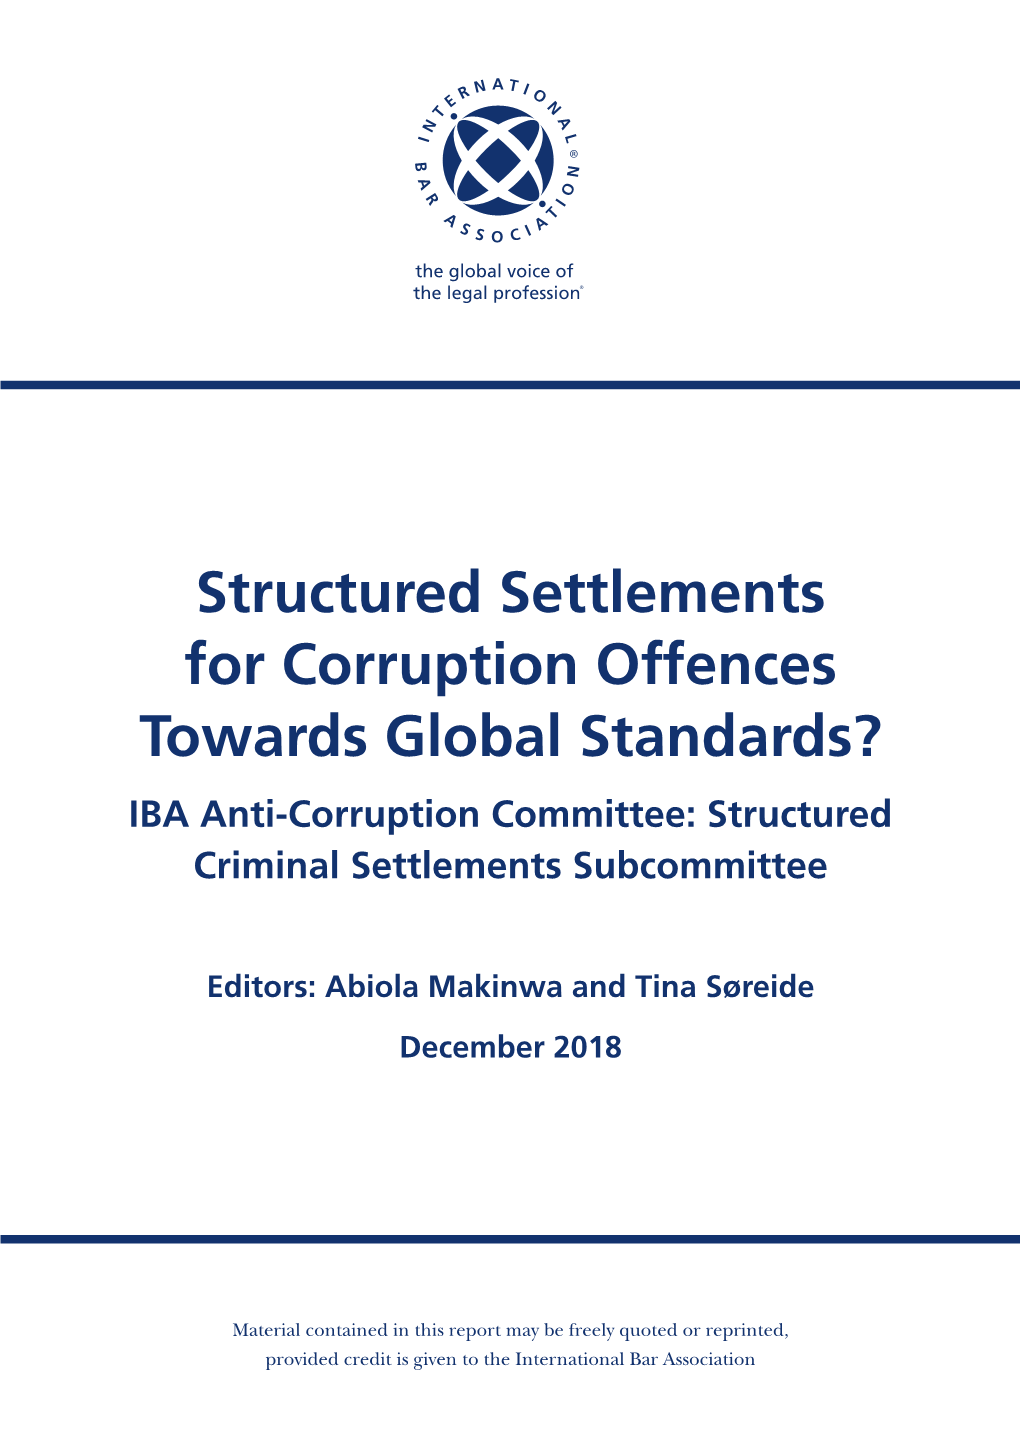 Structured Settlements for Corruption Offences Towards Global Standards? IBA Anti-Corruption Committee: Structured Criminal Settlements Subcommittee